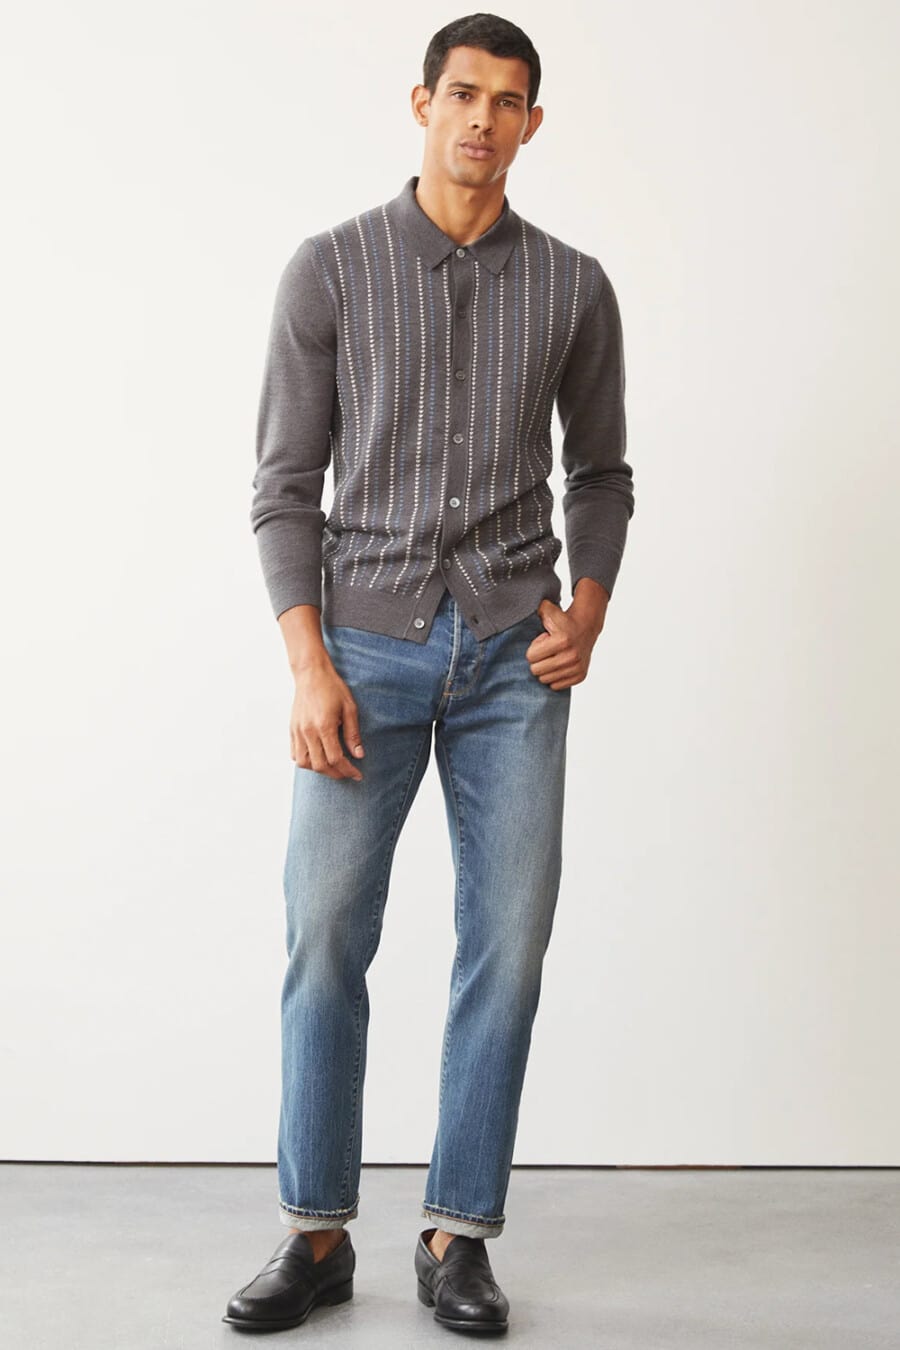 Men's mid-wash jeans, grey long-sleeve button-up polo shirt and black leather penny loafers worn sockless outfit